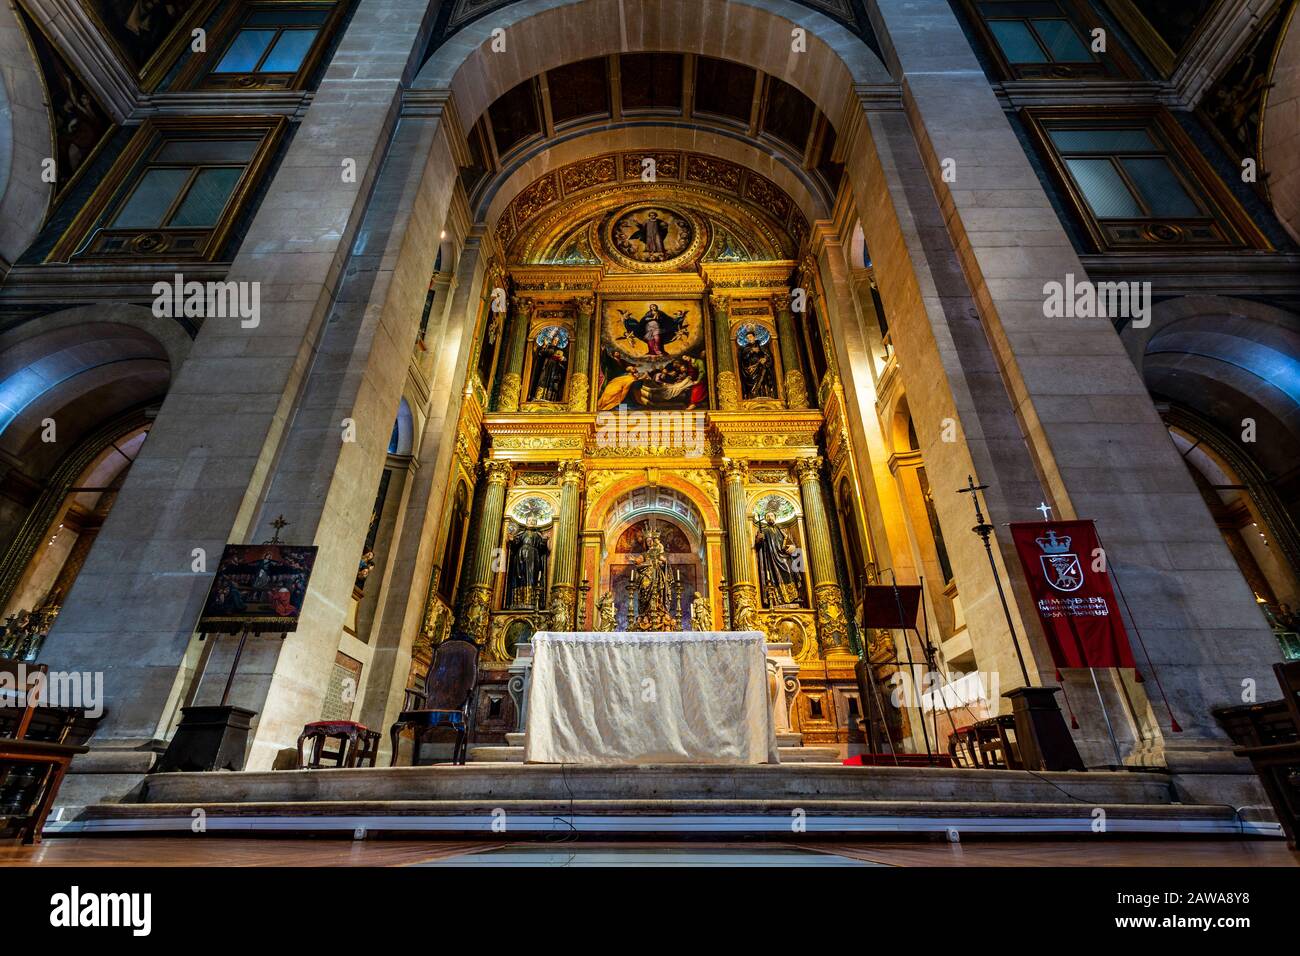 View of the chancel with a gilded altar piece and representation of the Jesuits greatest saints, in Bairro Alto, Lisbon, Portugal Stock Photo